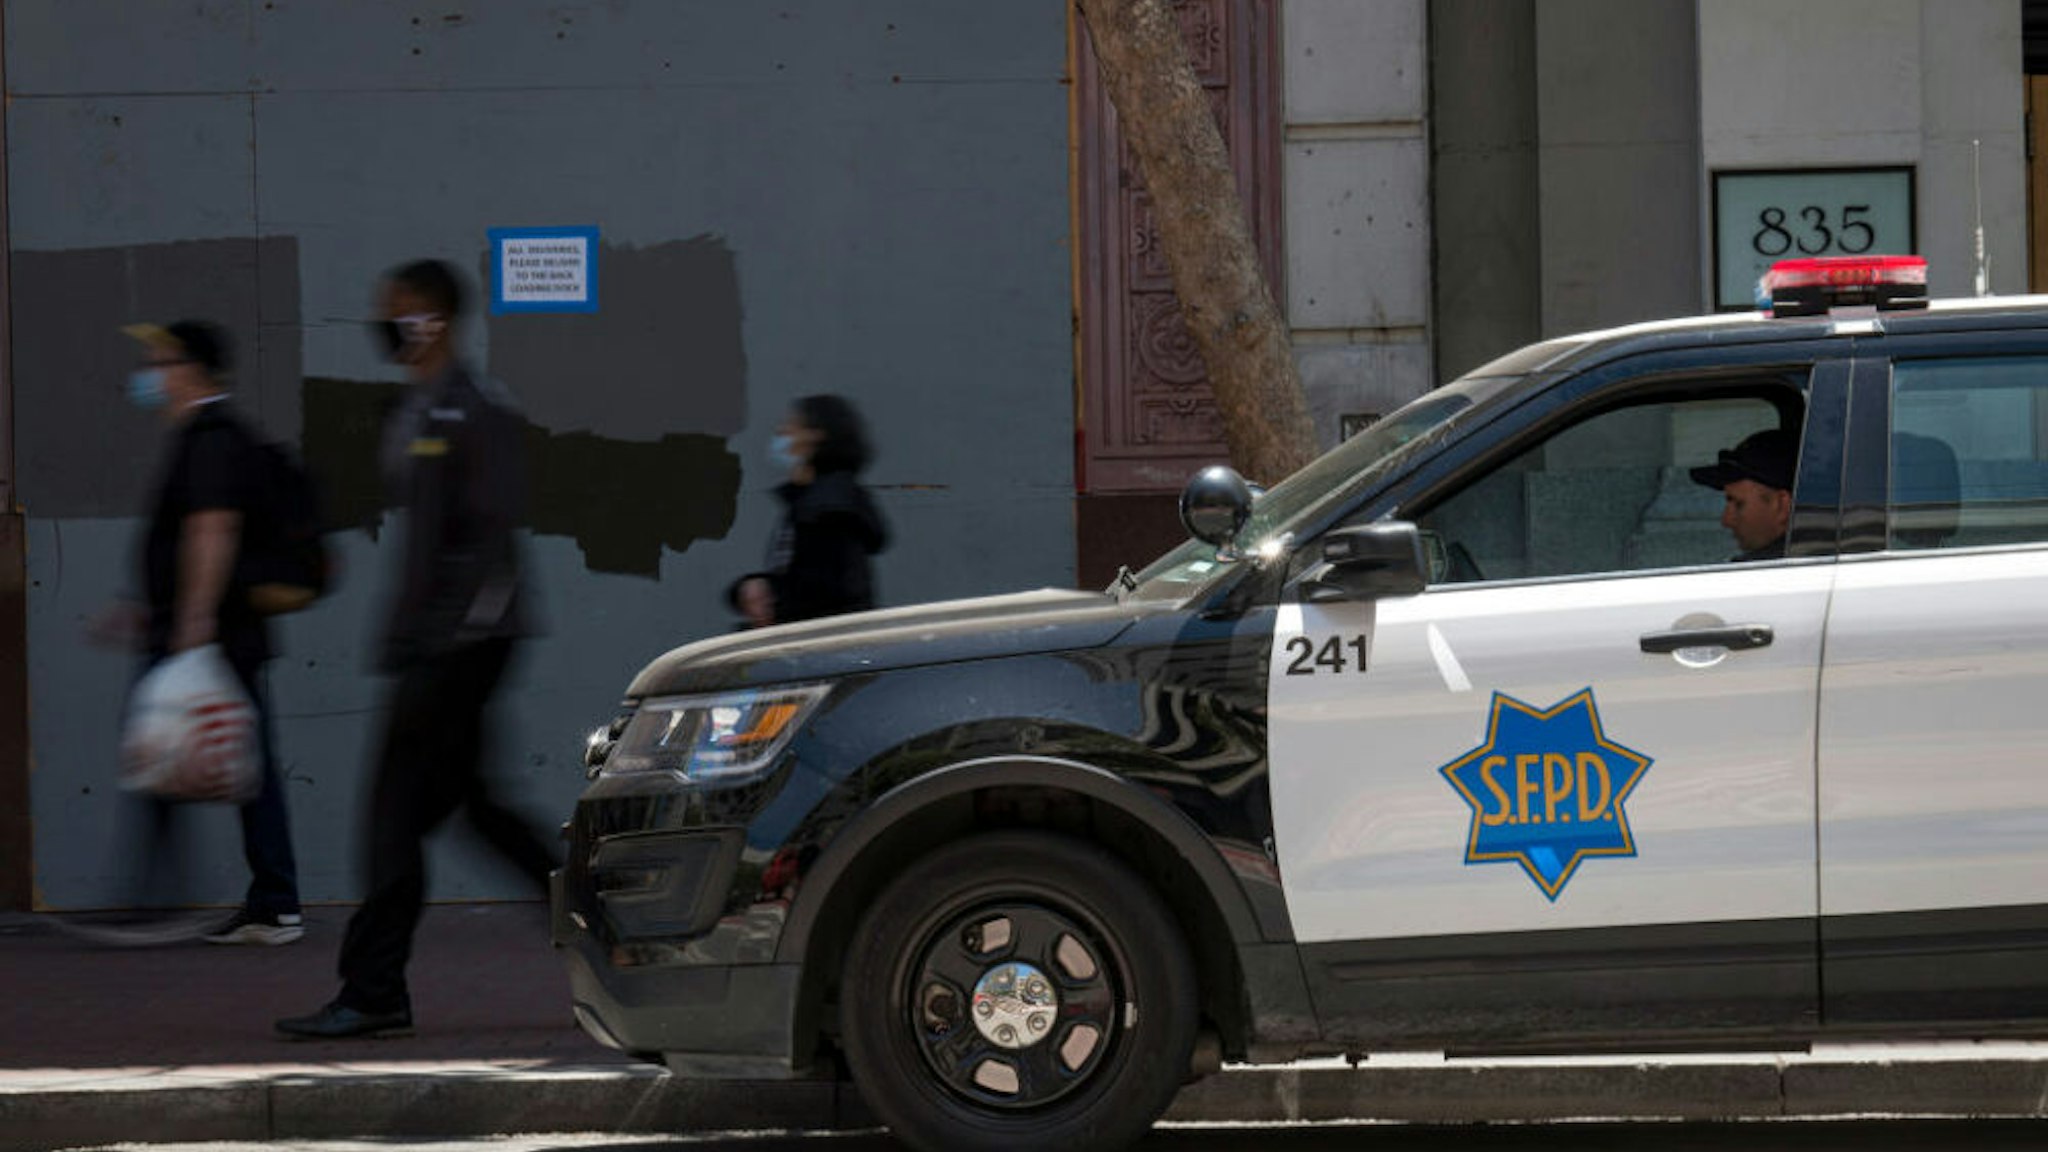 A City of San Francisco police officer sits in a patrol vehicle on Market Street in San Francisco, California, U.S., on Tuesday, June 16, 2020. San Francisco police will stop responding to neighbor disputes, reports on homeless people, school discipline interventions and other non-criminal activities as part of a police reform plan the mayor announced Thursday.